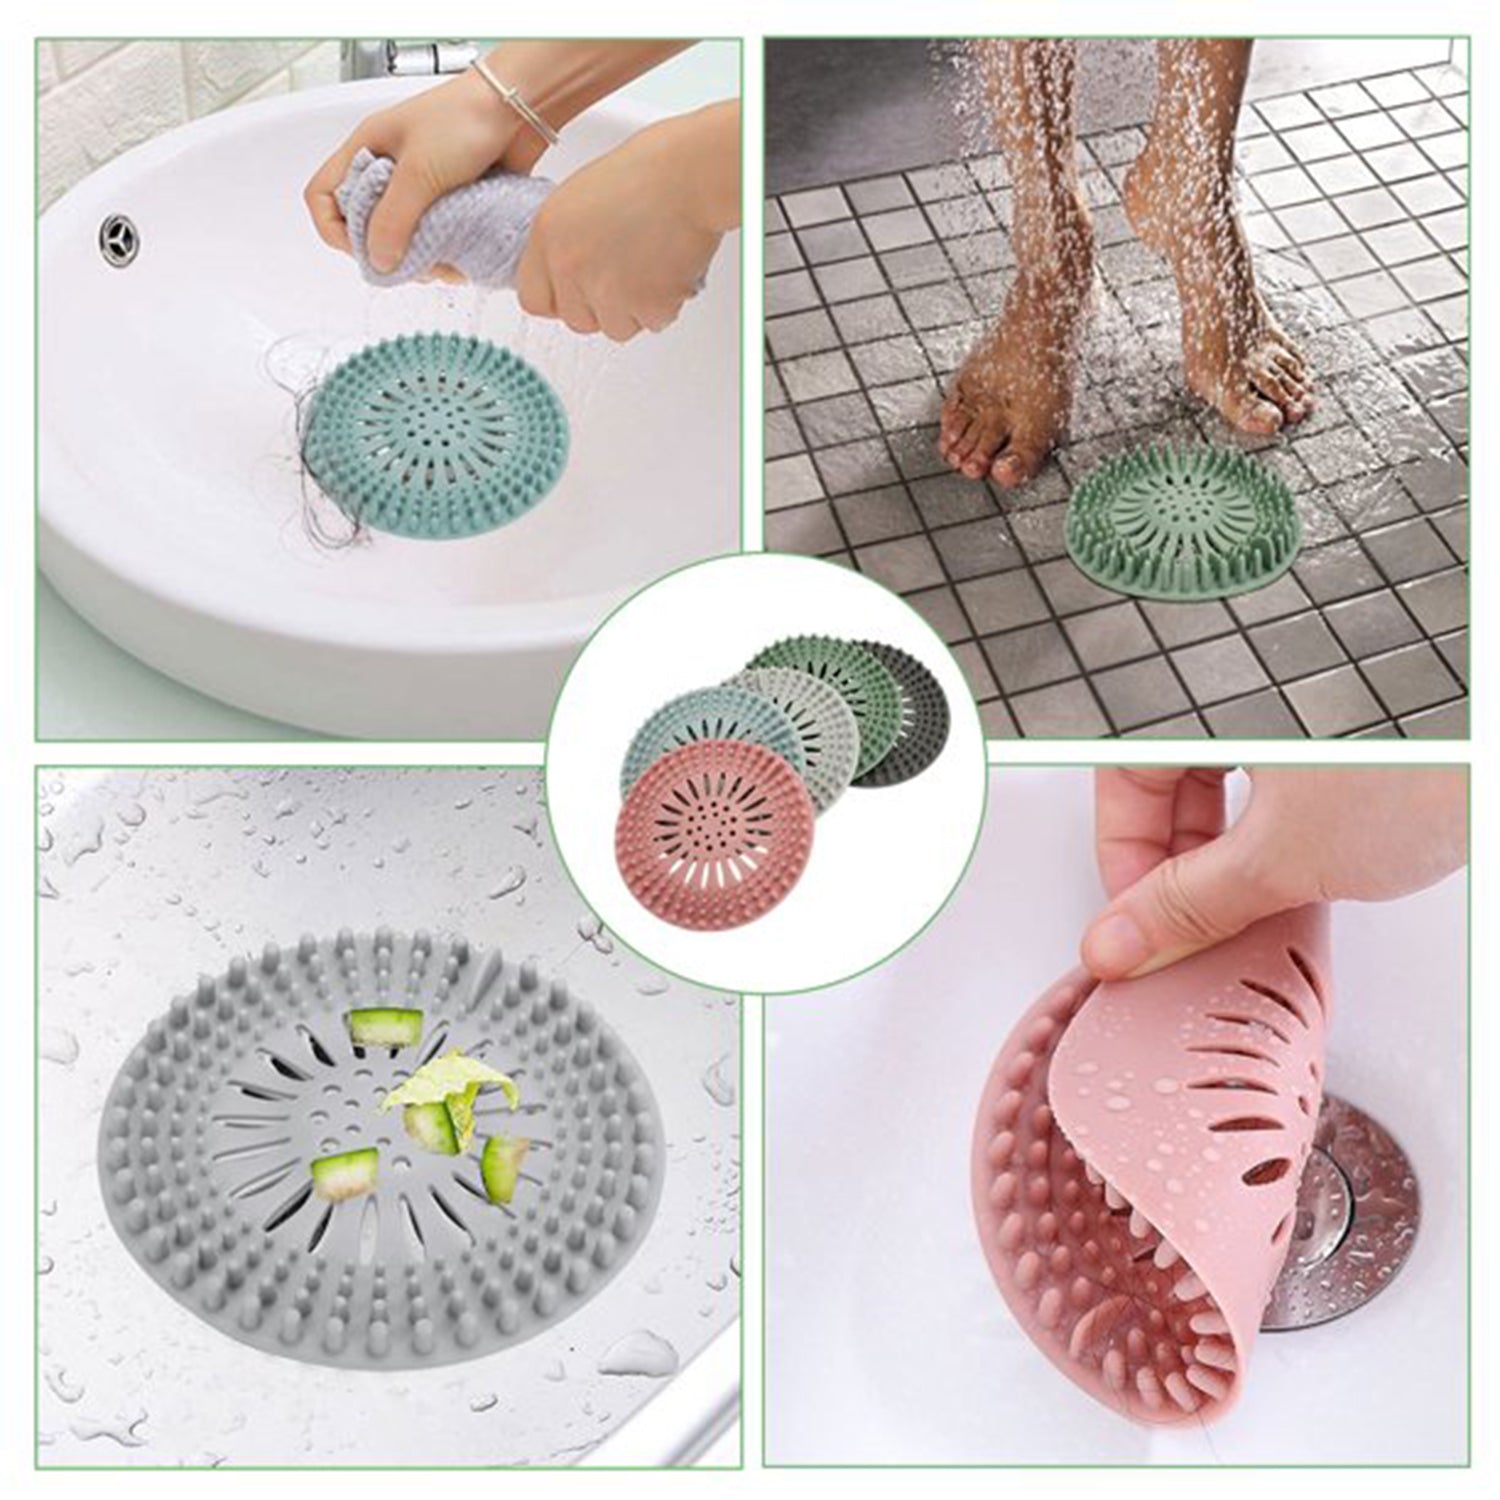 4738 Shower Drain Cover Used for draining water present over floor surfaces of bathroom and toilets etc. DeoDap